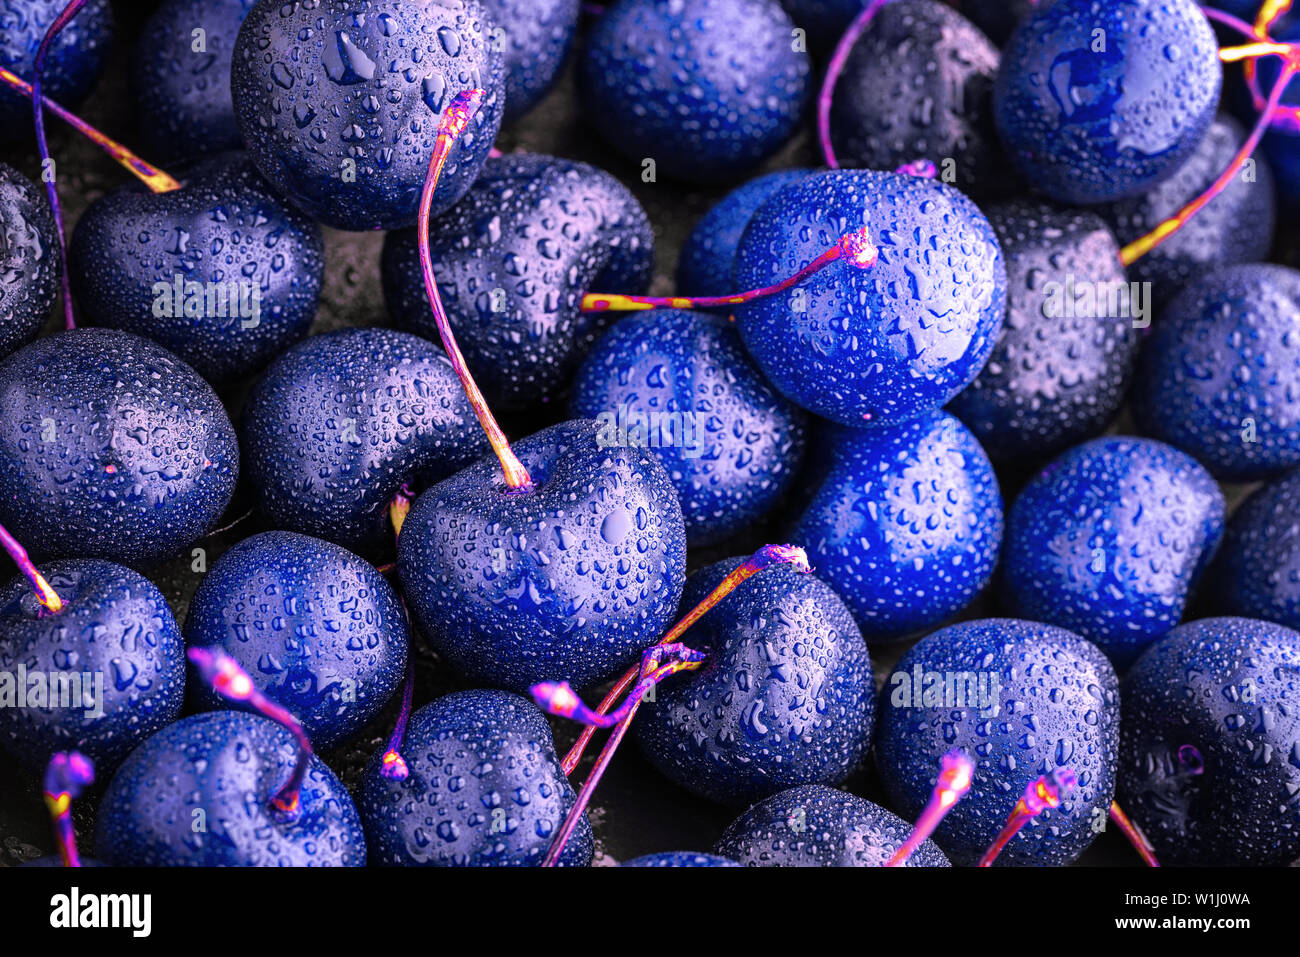 close-up of bright blue ripe cherries. unusual blue background. Large collection of fresh blue cherries. Stock Photo